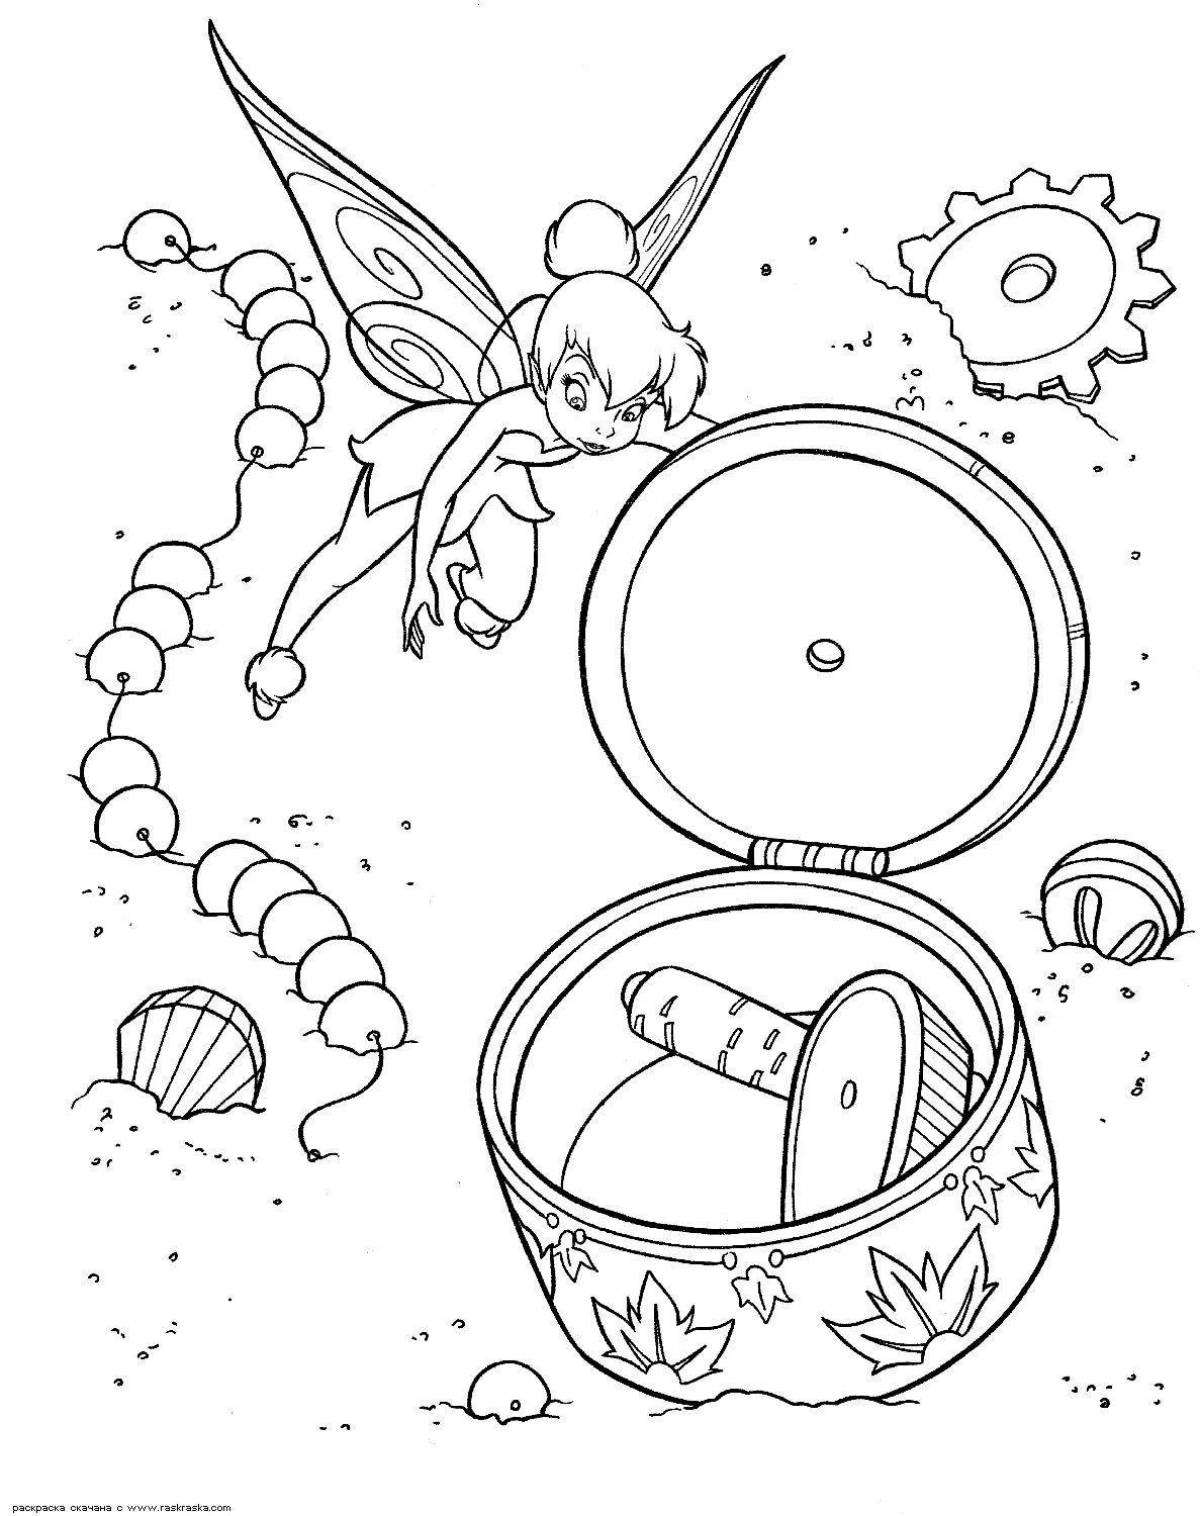 Vibrant music box coloring page